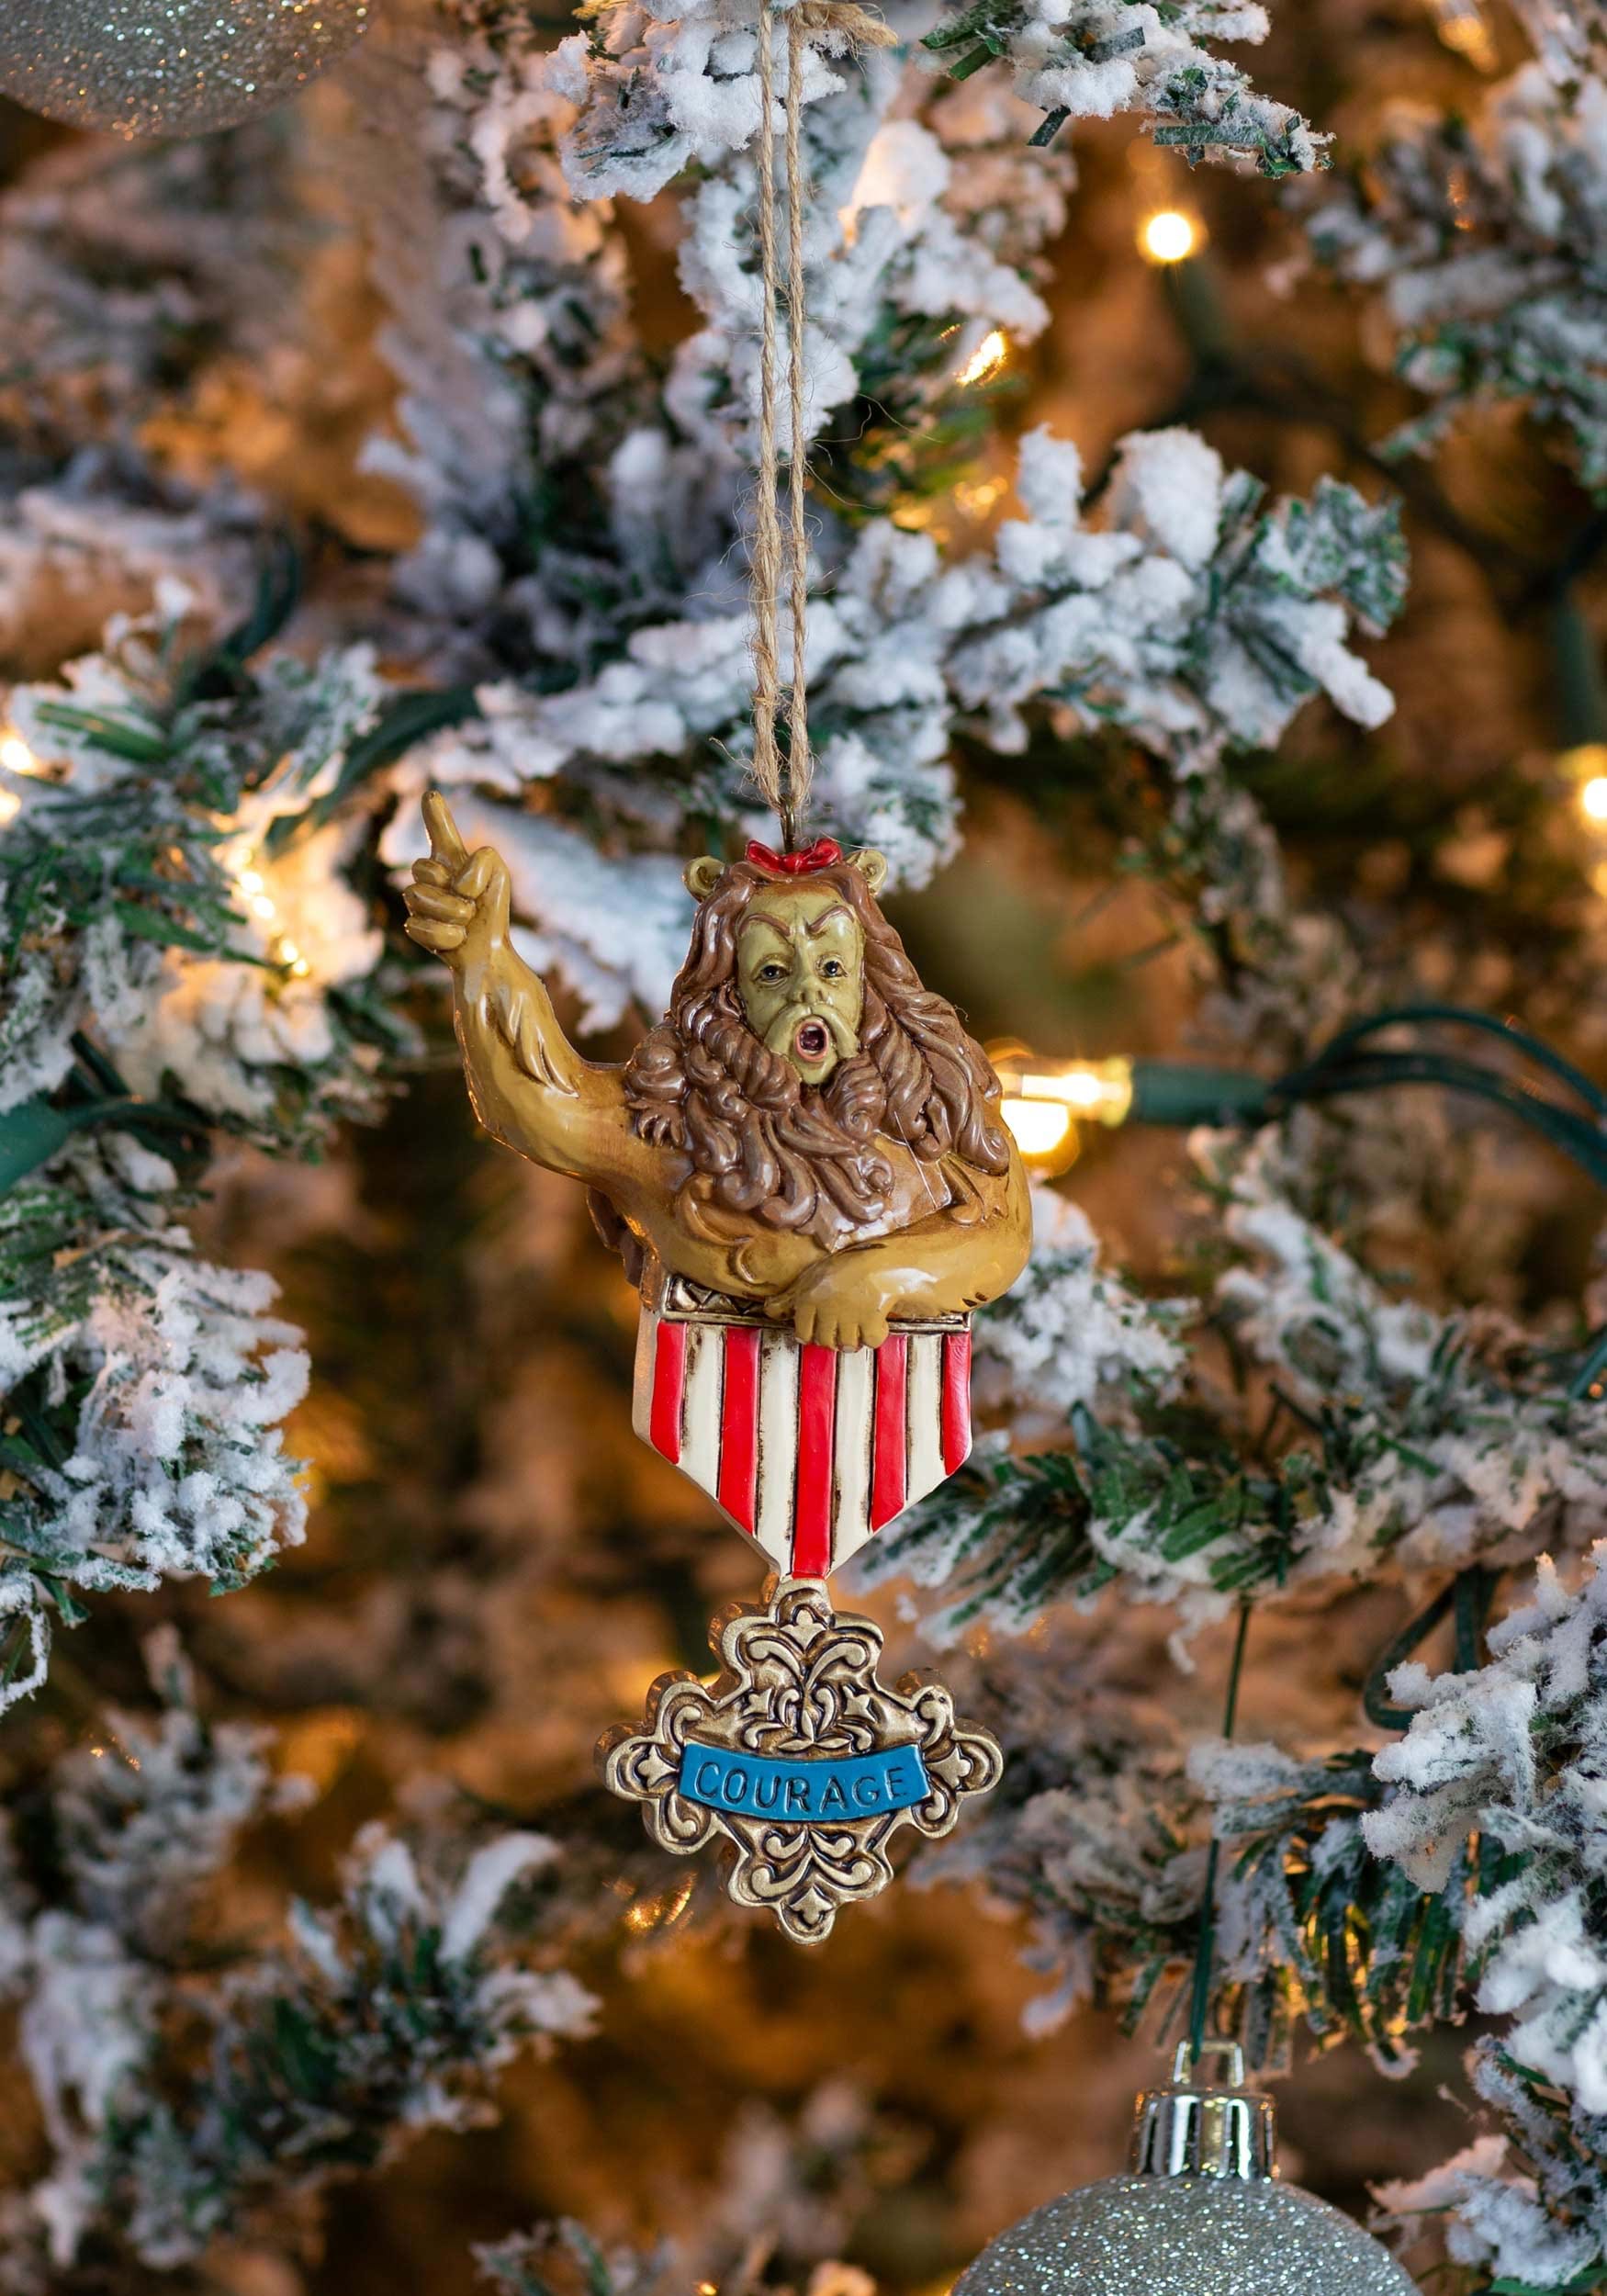 Cowardly Lion Courage Wizard of Oz Ornament